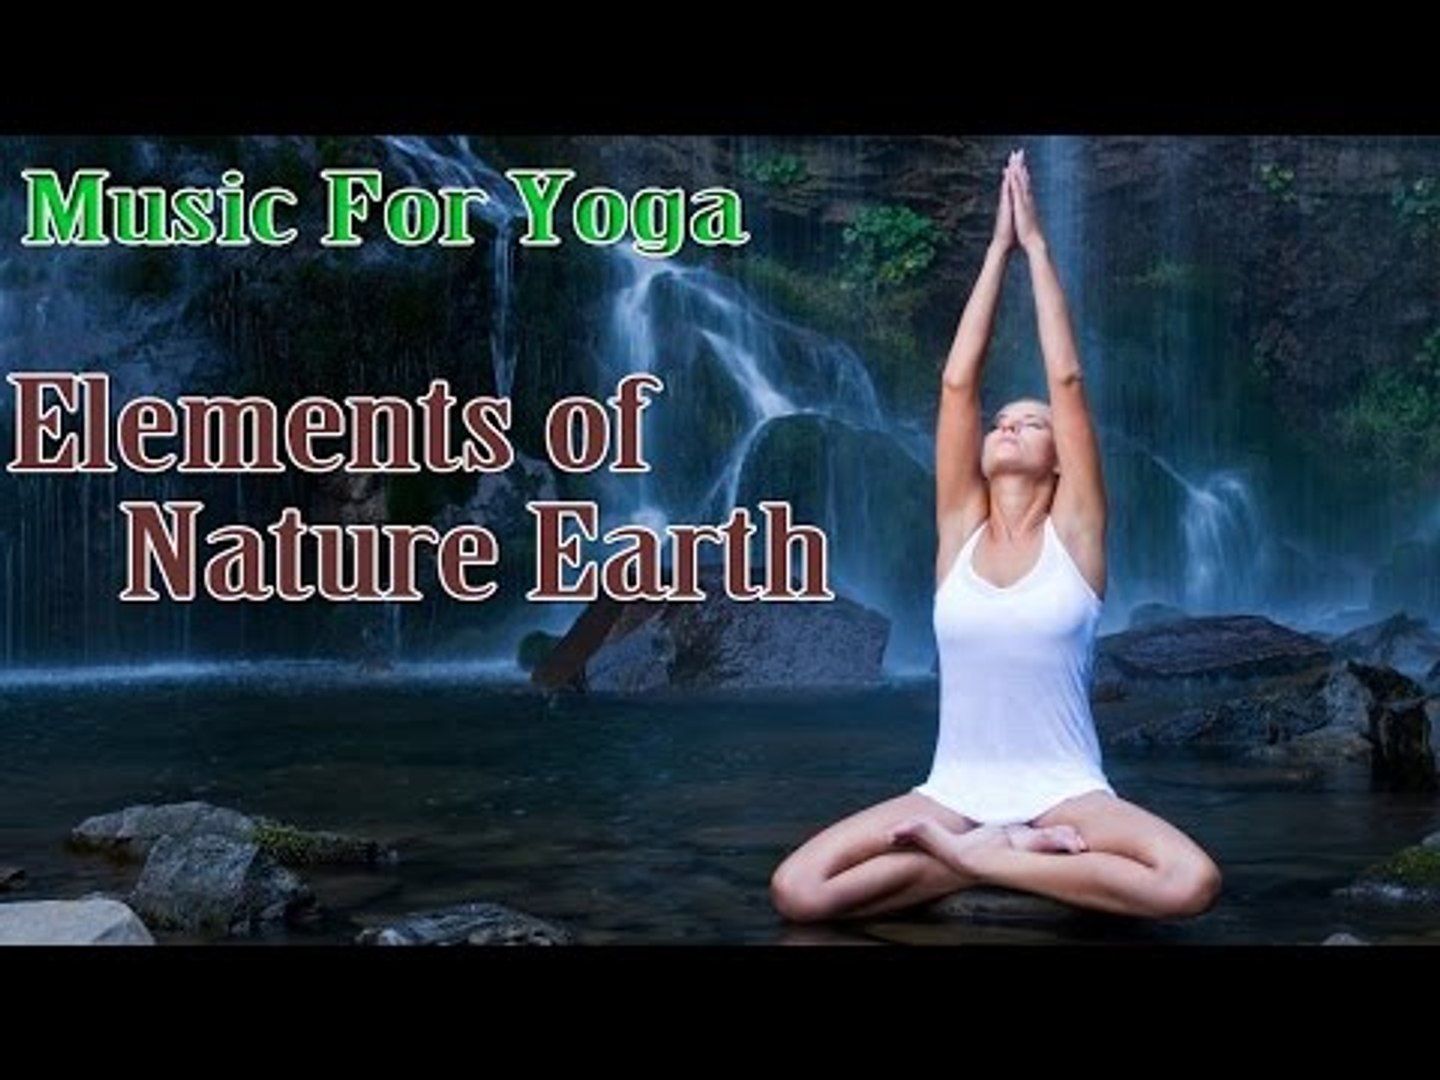 Music for Healing, Stress Relief, Yoga Exercises, Meditation - Natural Elements: EARTH